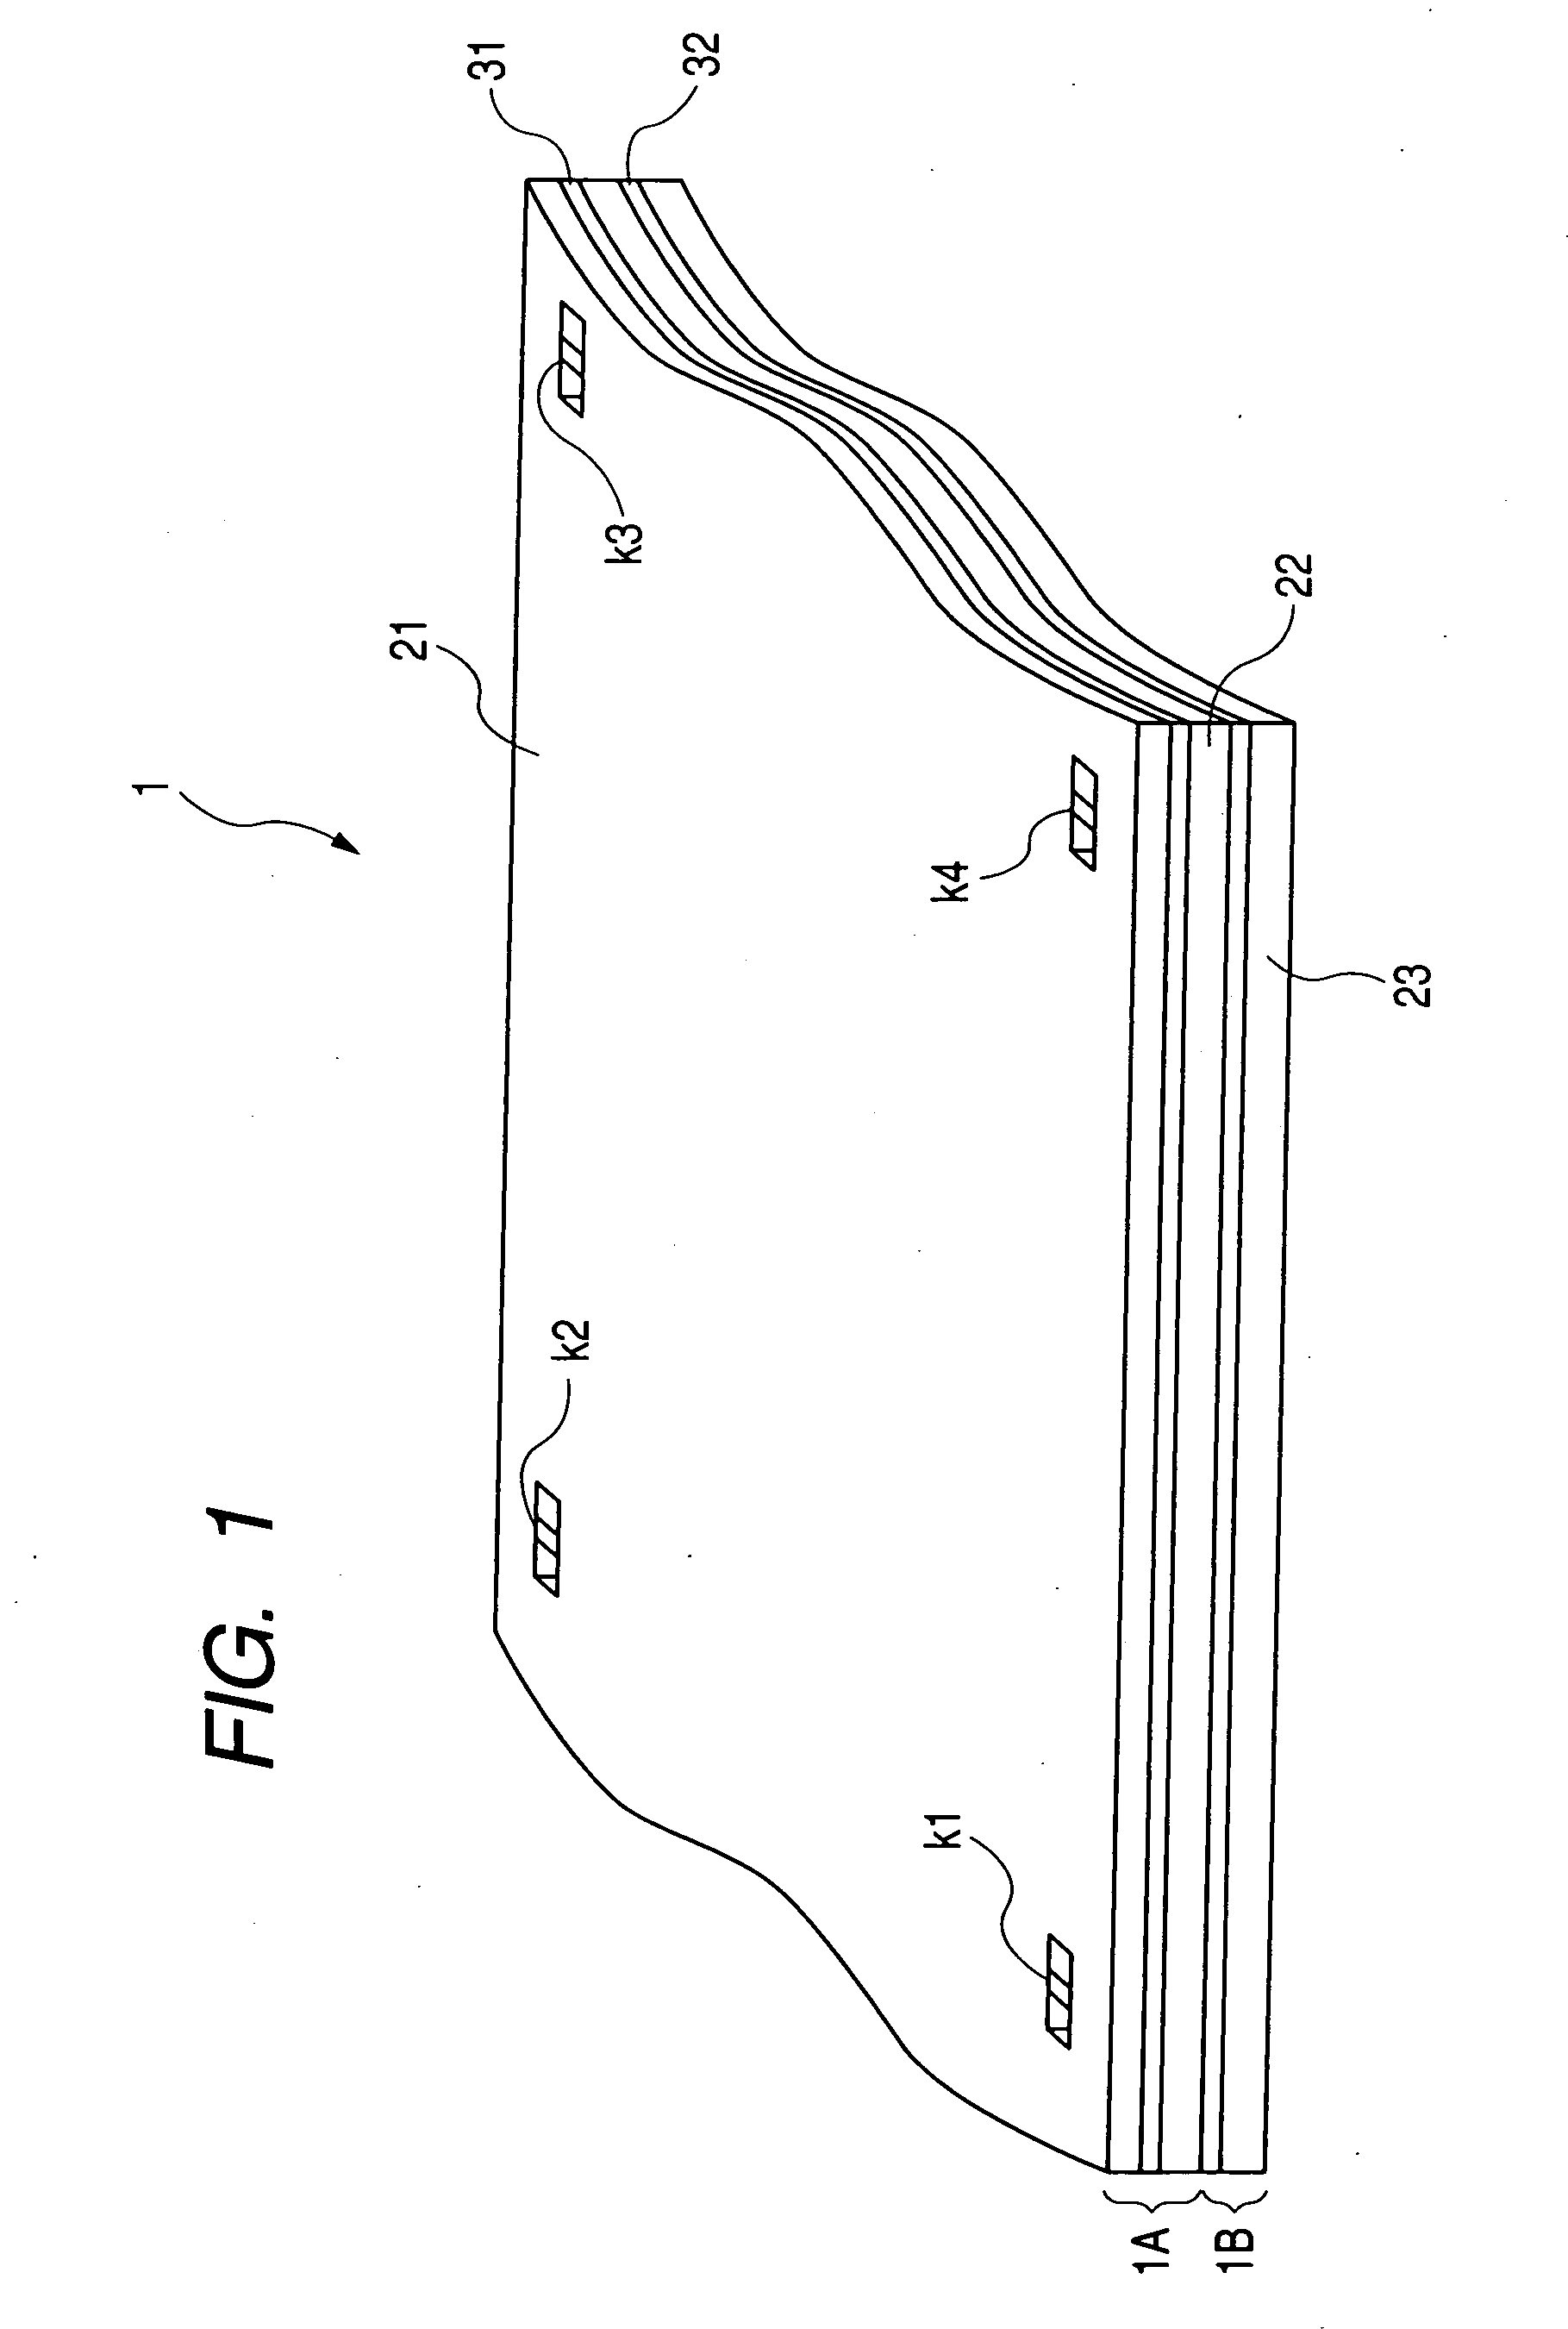 Different materials-laminate metal plate and different materials-laminate core, and method of producing the same